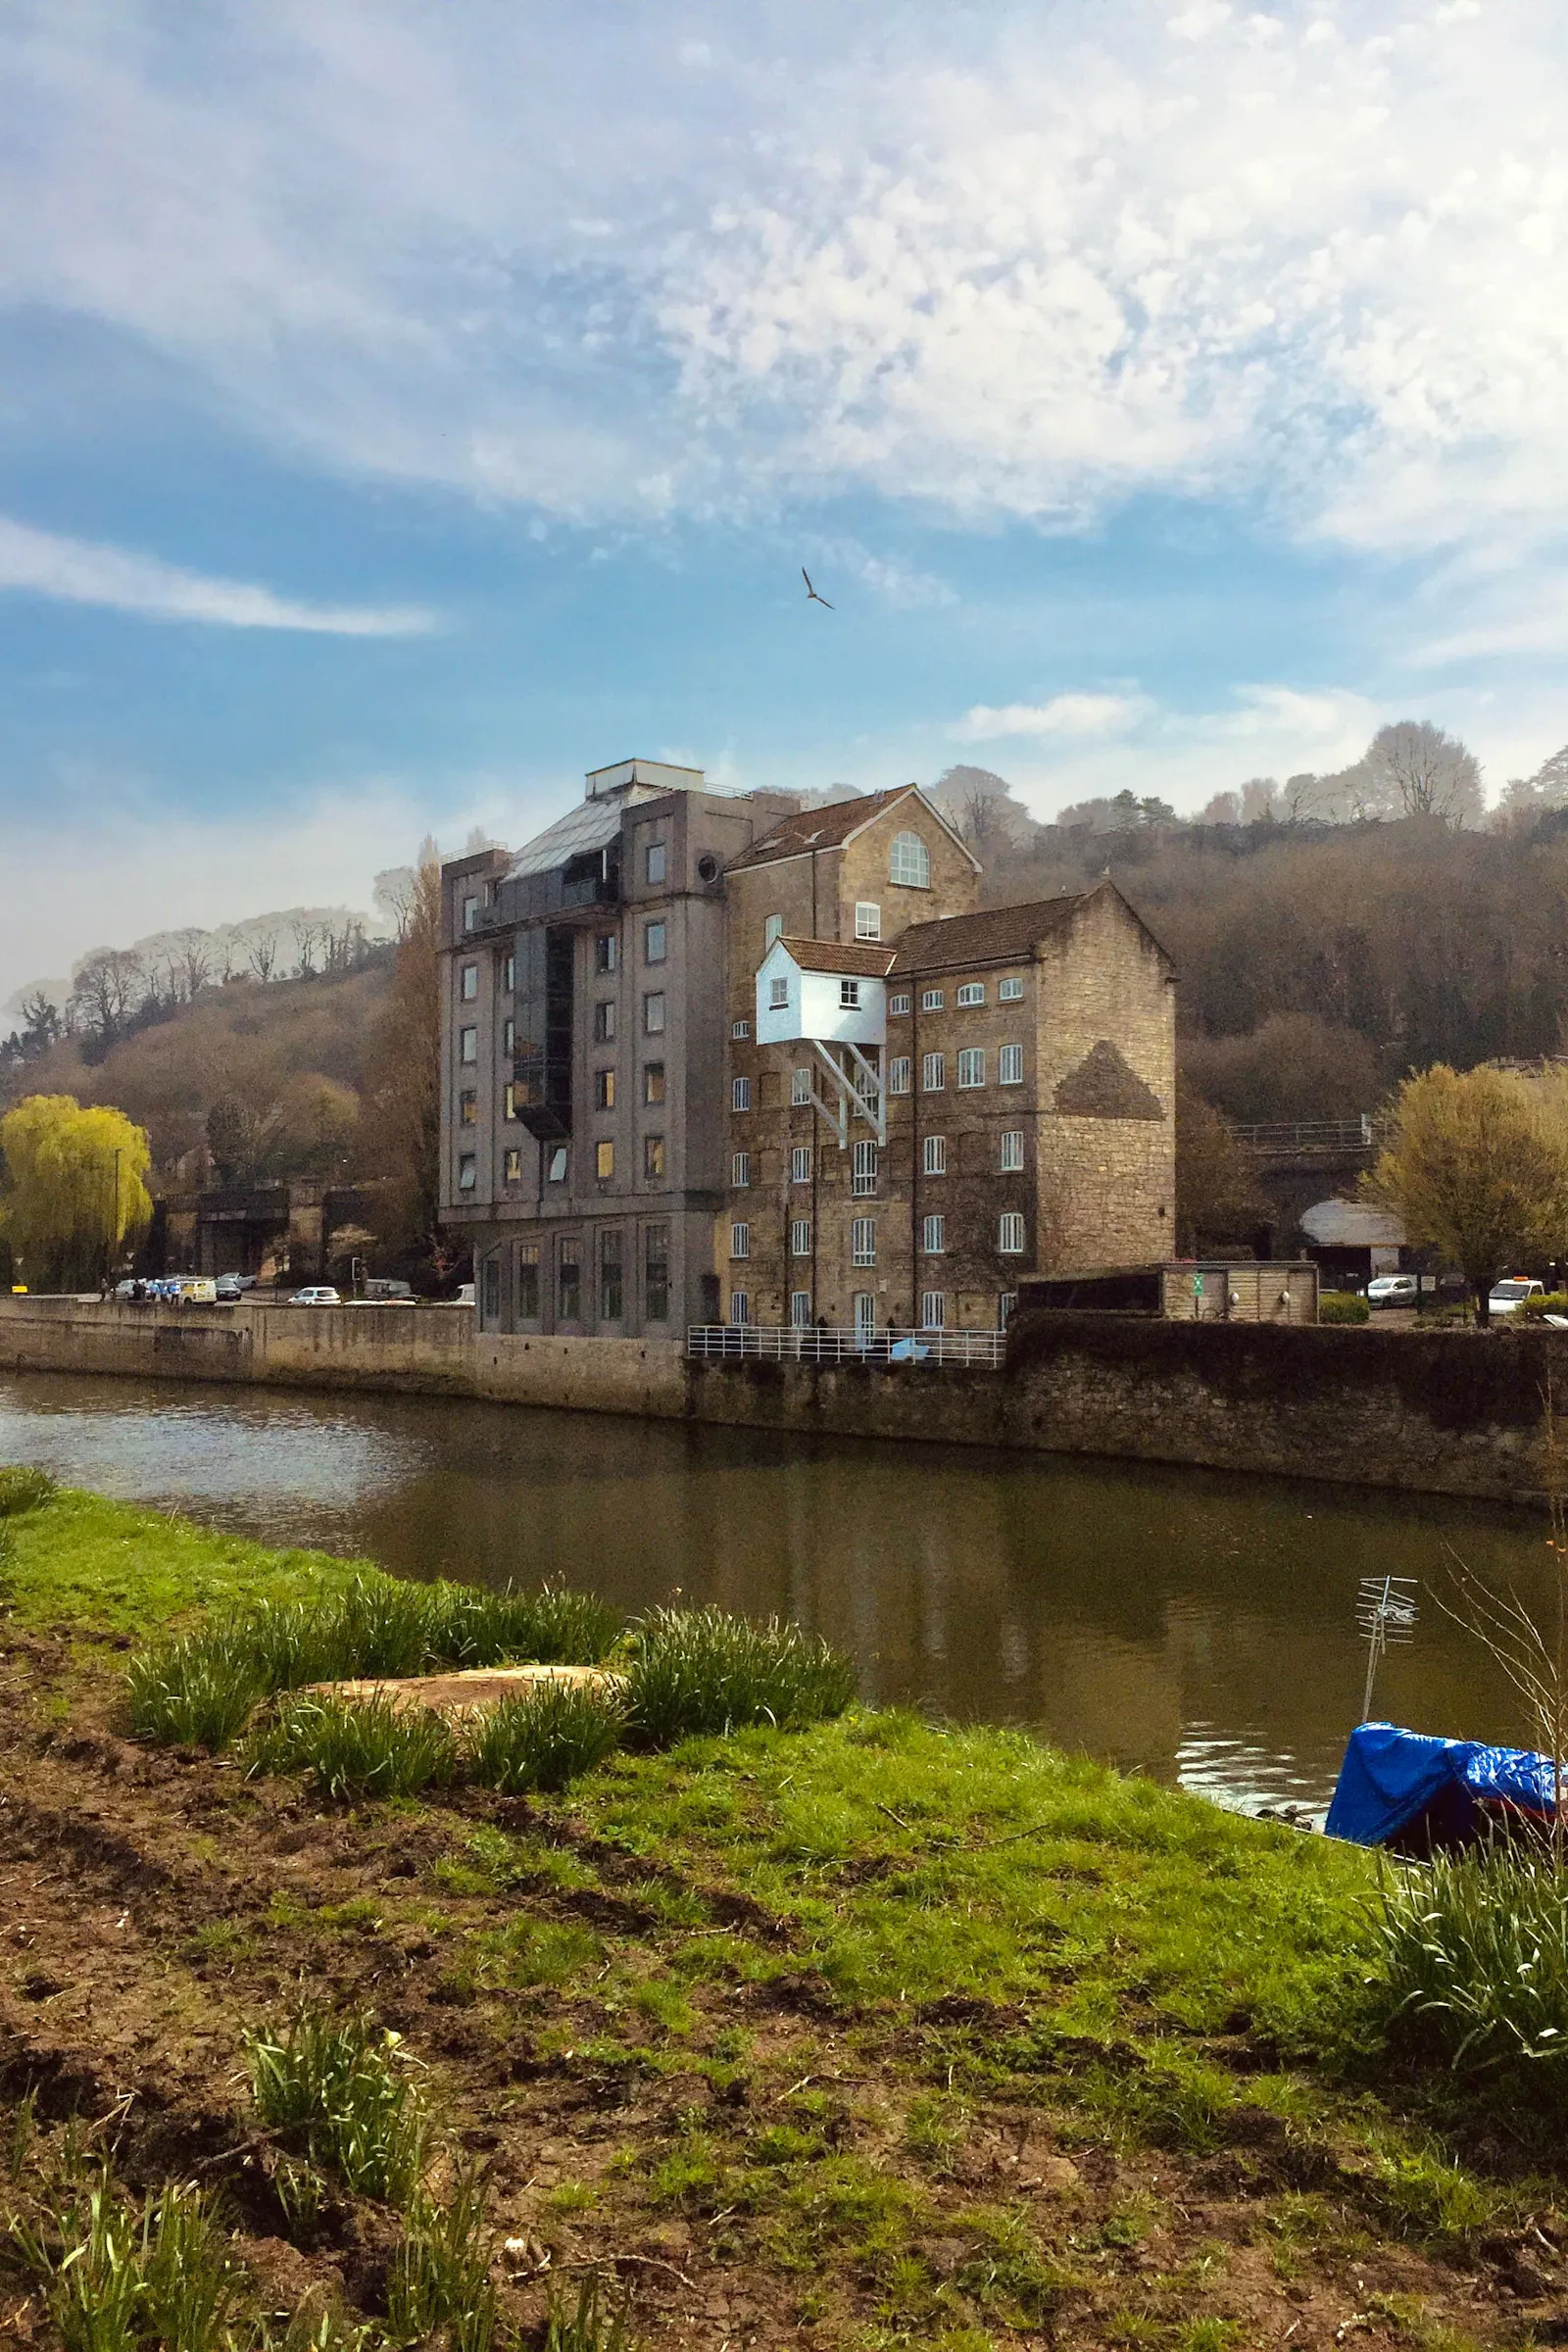 A gull flies above house jutting over the river Avon in Bath